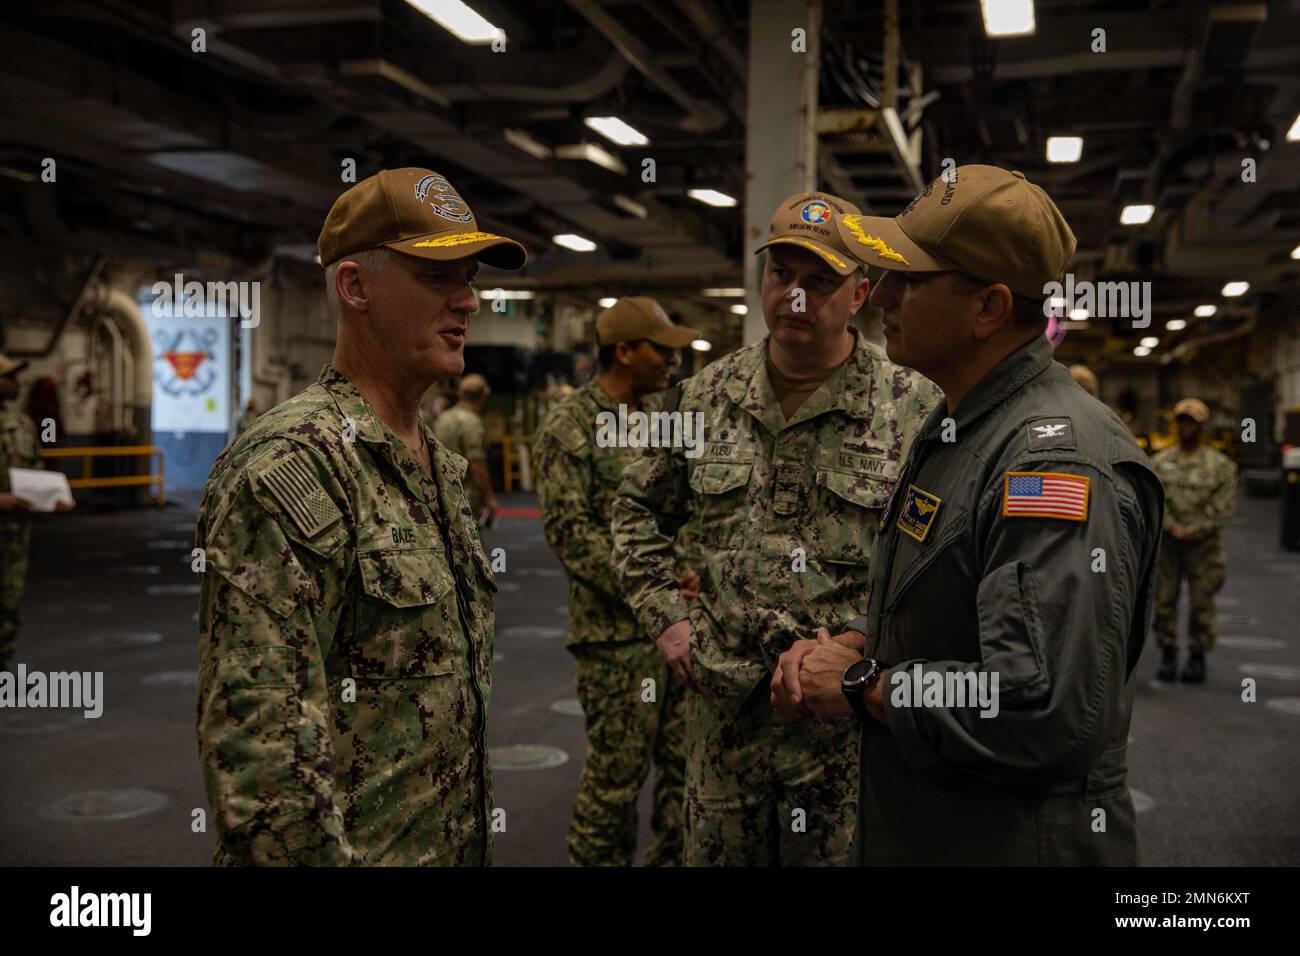 SAN DIEGO (Sept. 29, 2022) – Rear Adm. Wayne Baze, commander, Expeditionary Strike Group 3, left, speaks to Capt. Tony Chavez, commanding officer of amphibious assault ship USS Makin Island (LHD 8), right, and Capt. Justin Kubu, commodore of Amphibious Squadron SEVEN, middle, during a North Atlantic Treaty Organization (NATO) visit aboard Makin Island, Sept. 29. The visit aims to provide an opportunity for NATO parliamentarians to learn more about the US-Indo Pacific policy as well as US military, technological and economic structure. Makin Island is homeported in San Diego. Stock Photo